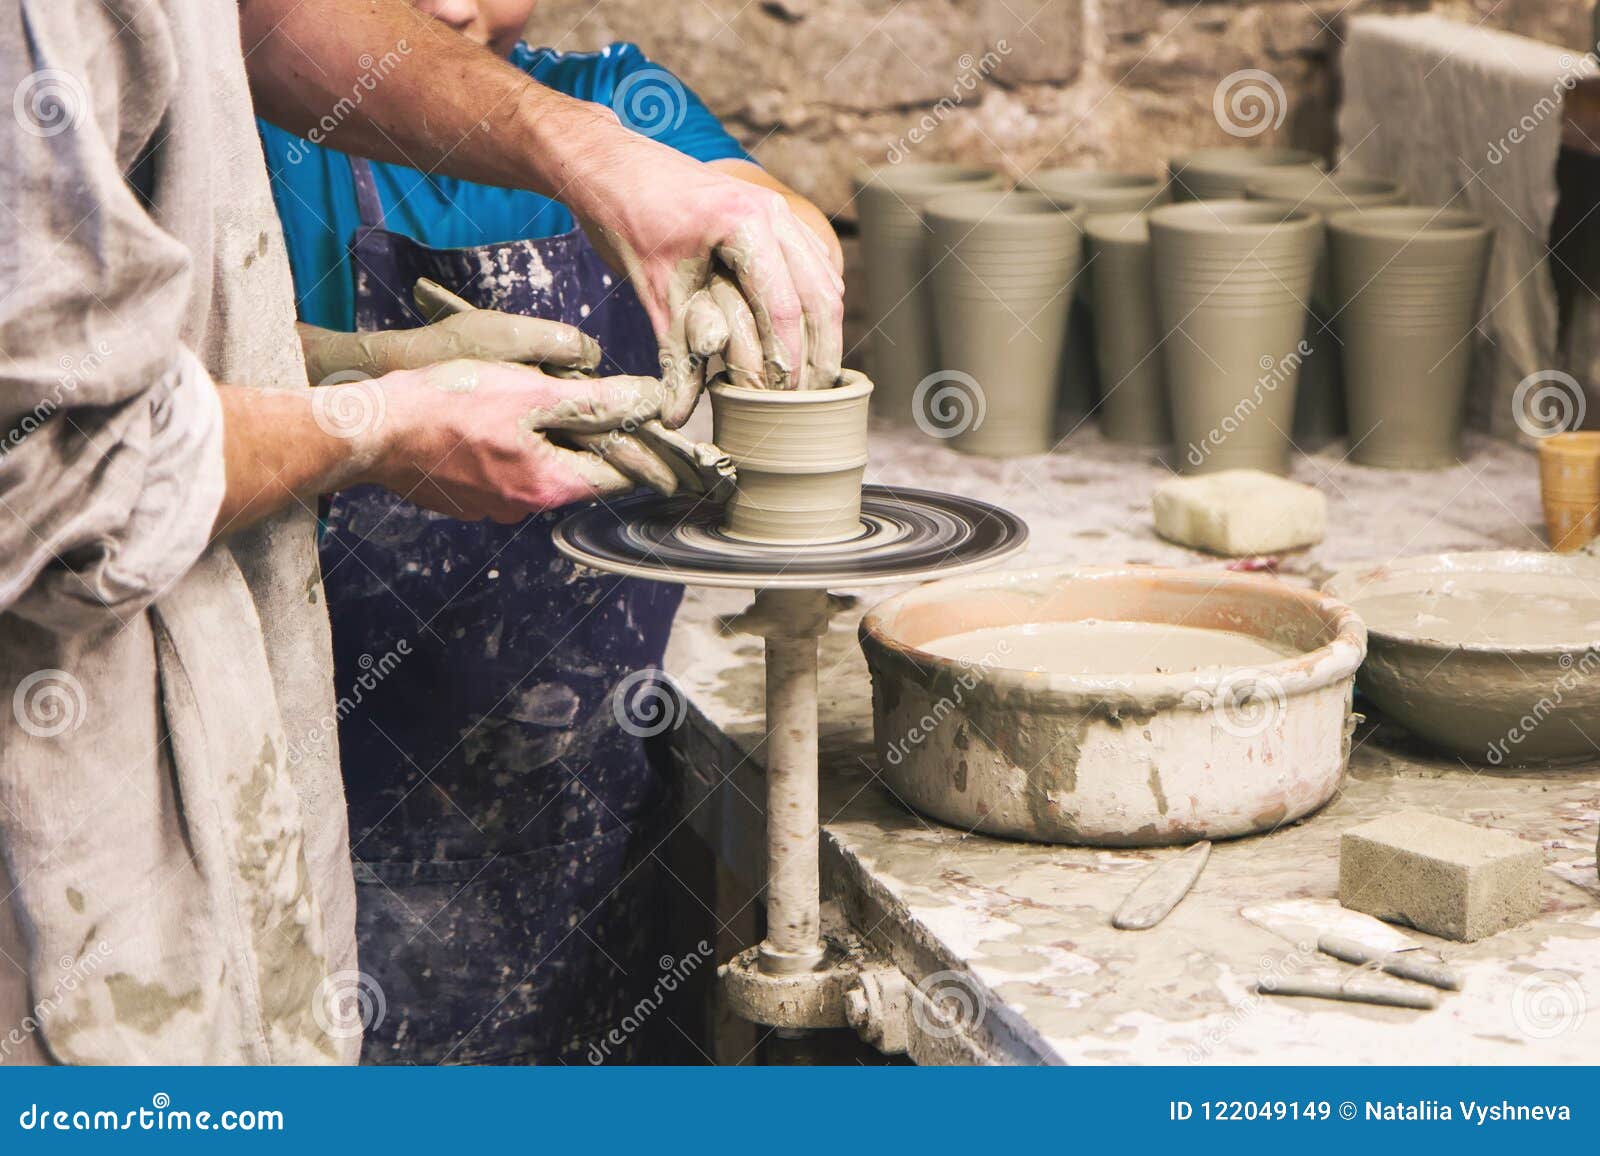 potter teaches to sculpt in clay pot on turning pottery wheel